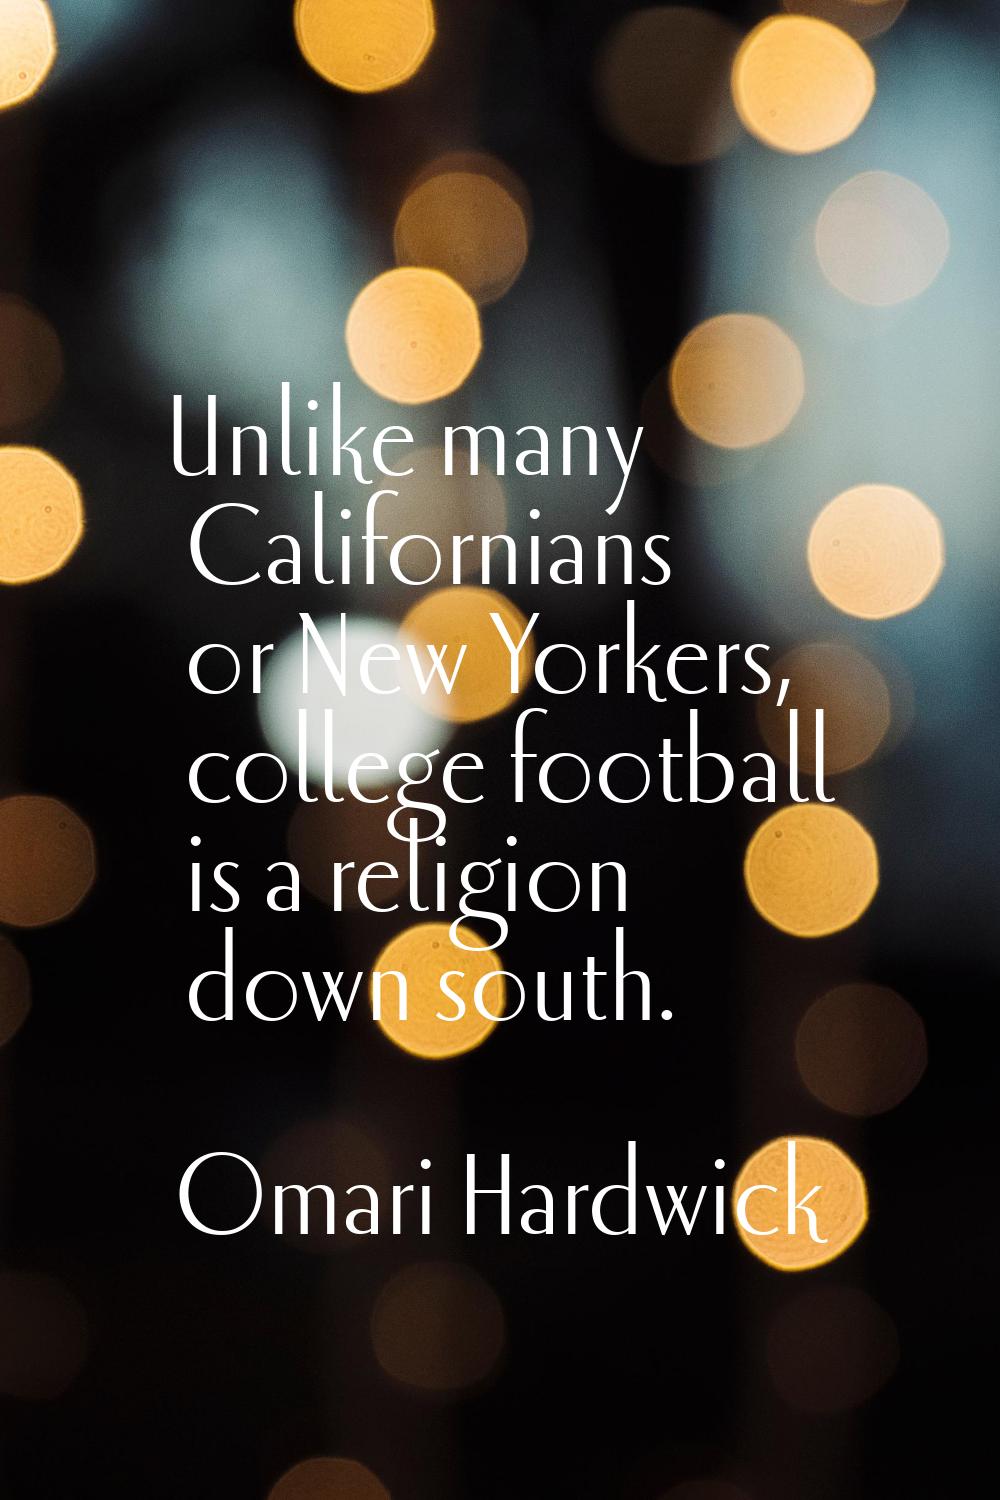 Unlike many Californians or New Yorkers, college football is a religion down south.